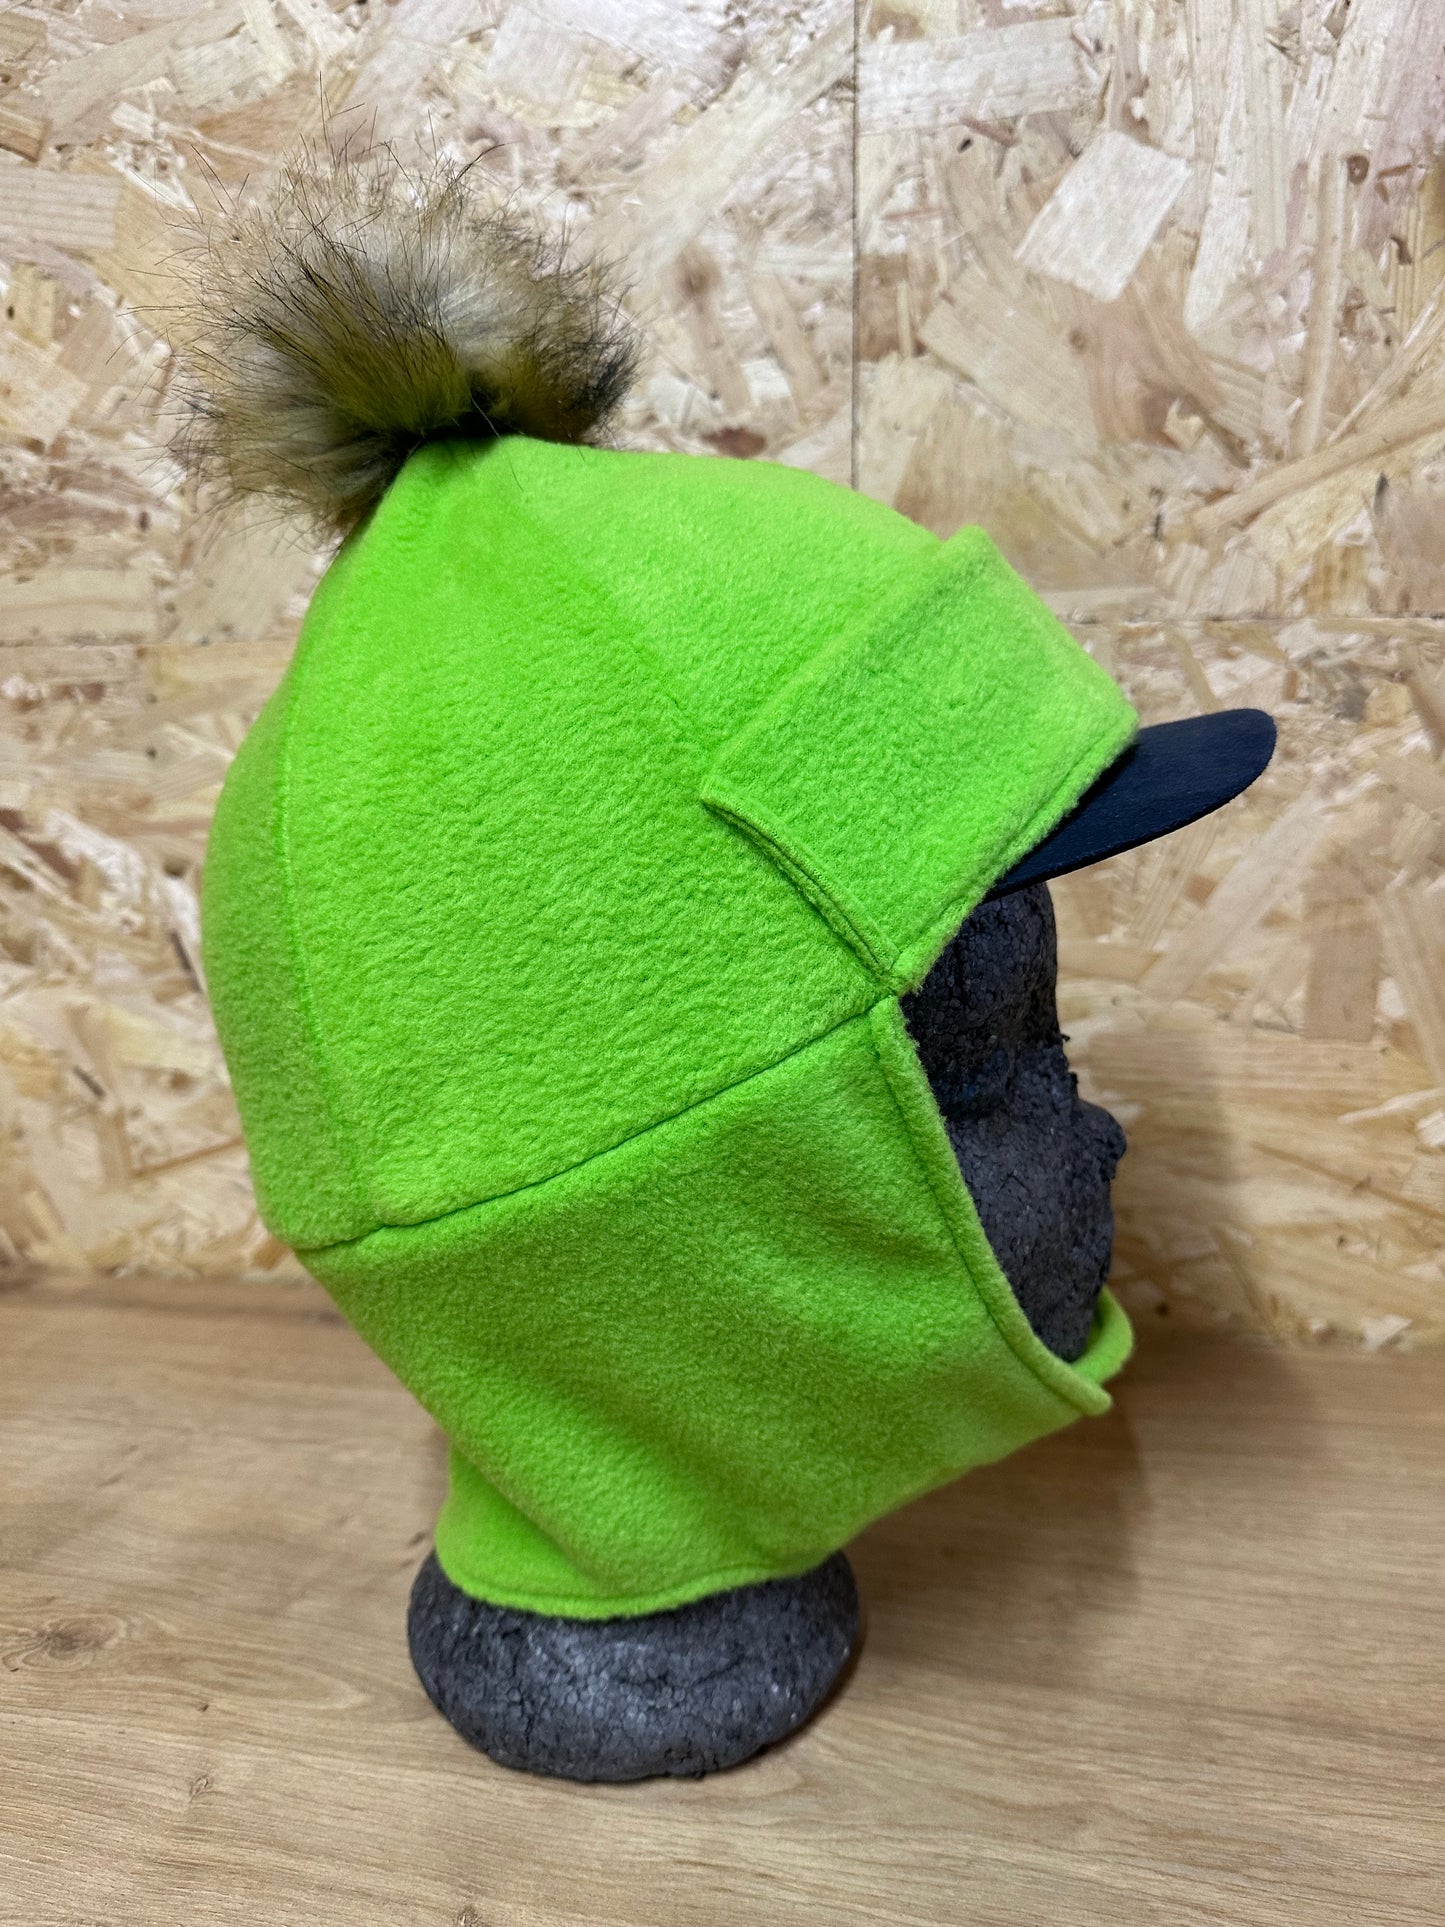 Adult Size Riding Hat / Face Cover